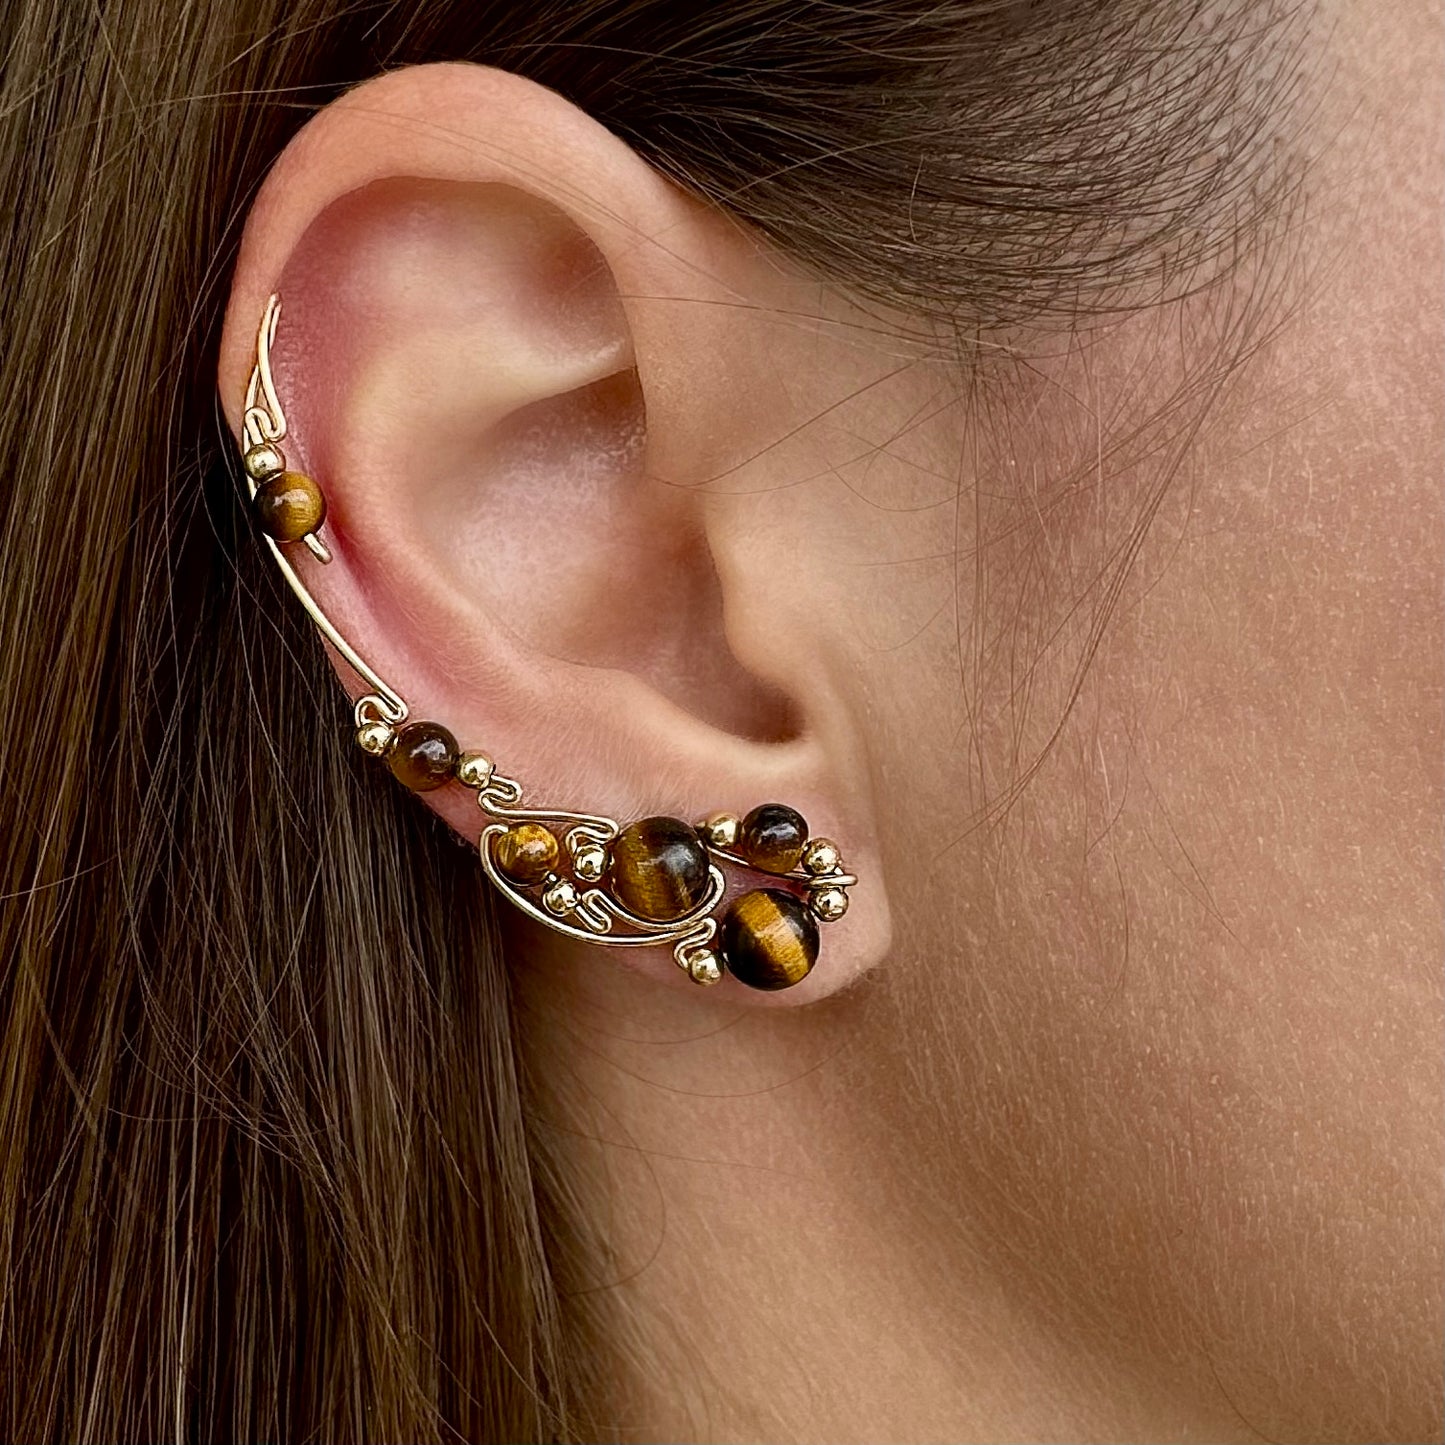 Vine ear climbers with silver beads - Sterling Silver 925